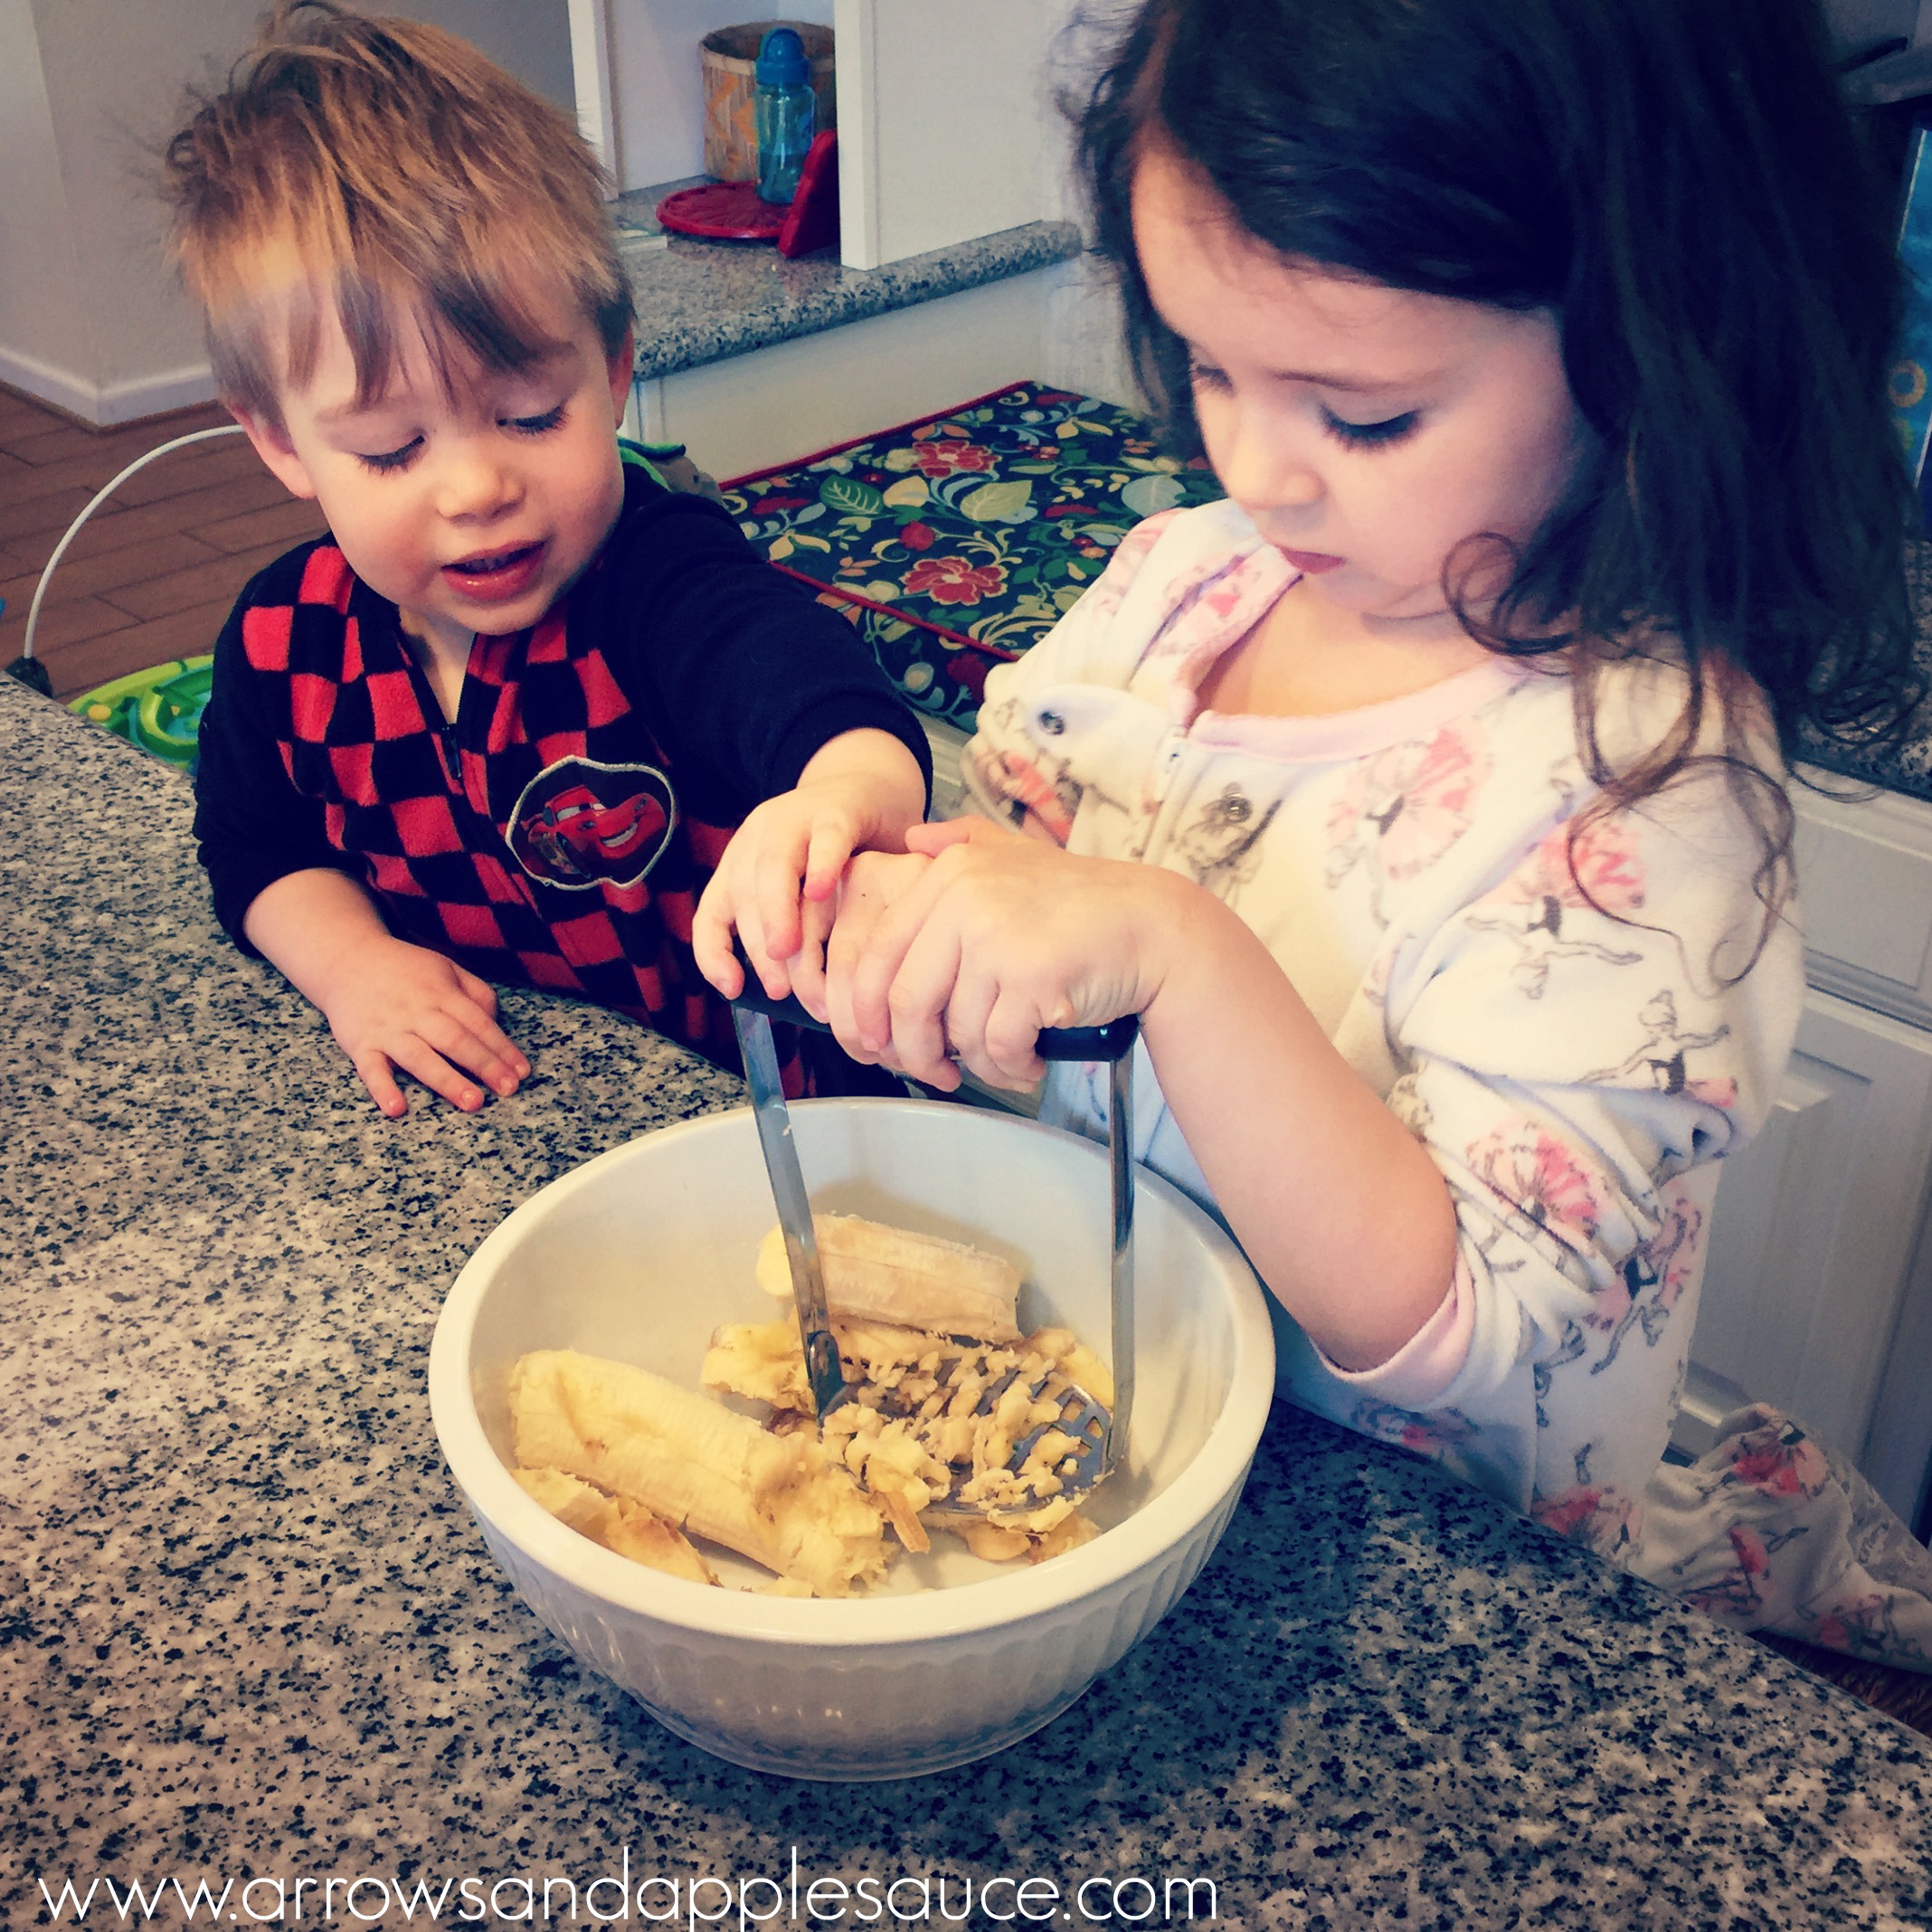 Five benefits of having kids help it the kitchen. From building vocabulary to enjoying fun new sensory experiences, cooking with little ones in the kitchen is so much fun!